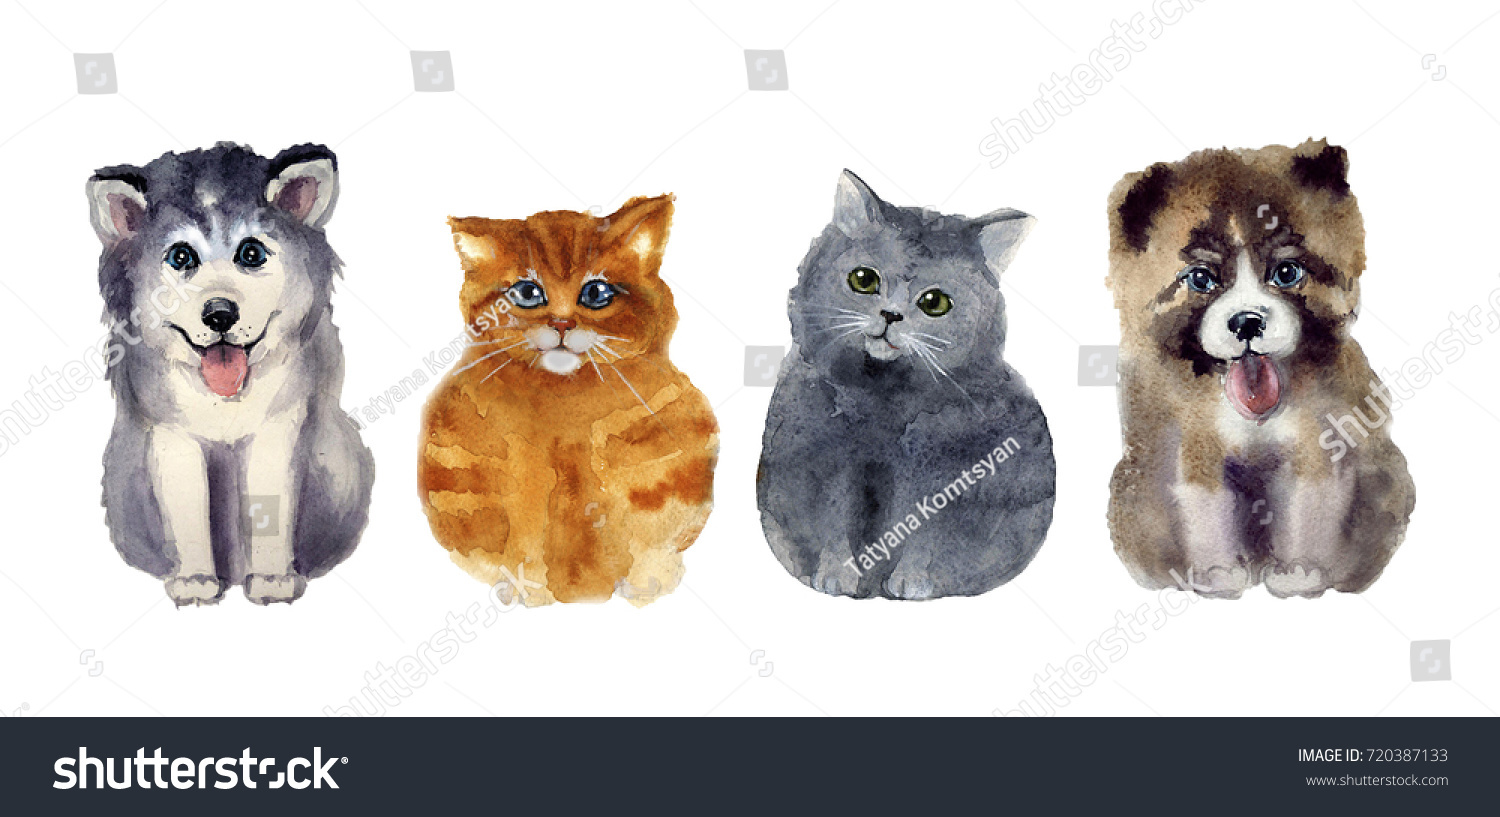 watercolor cute cats and dogs on the white background #720387133